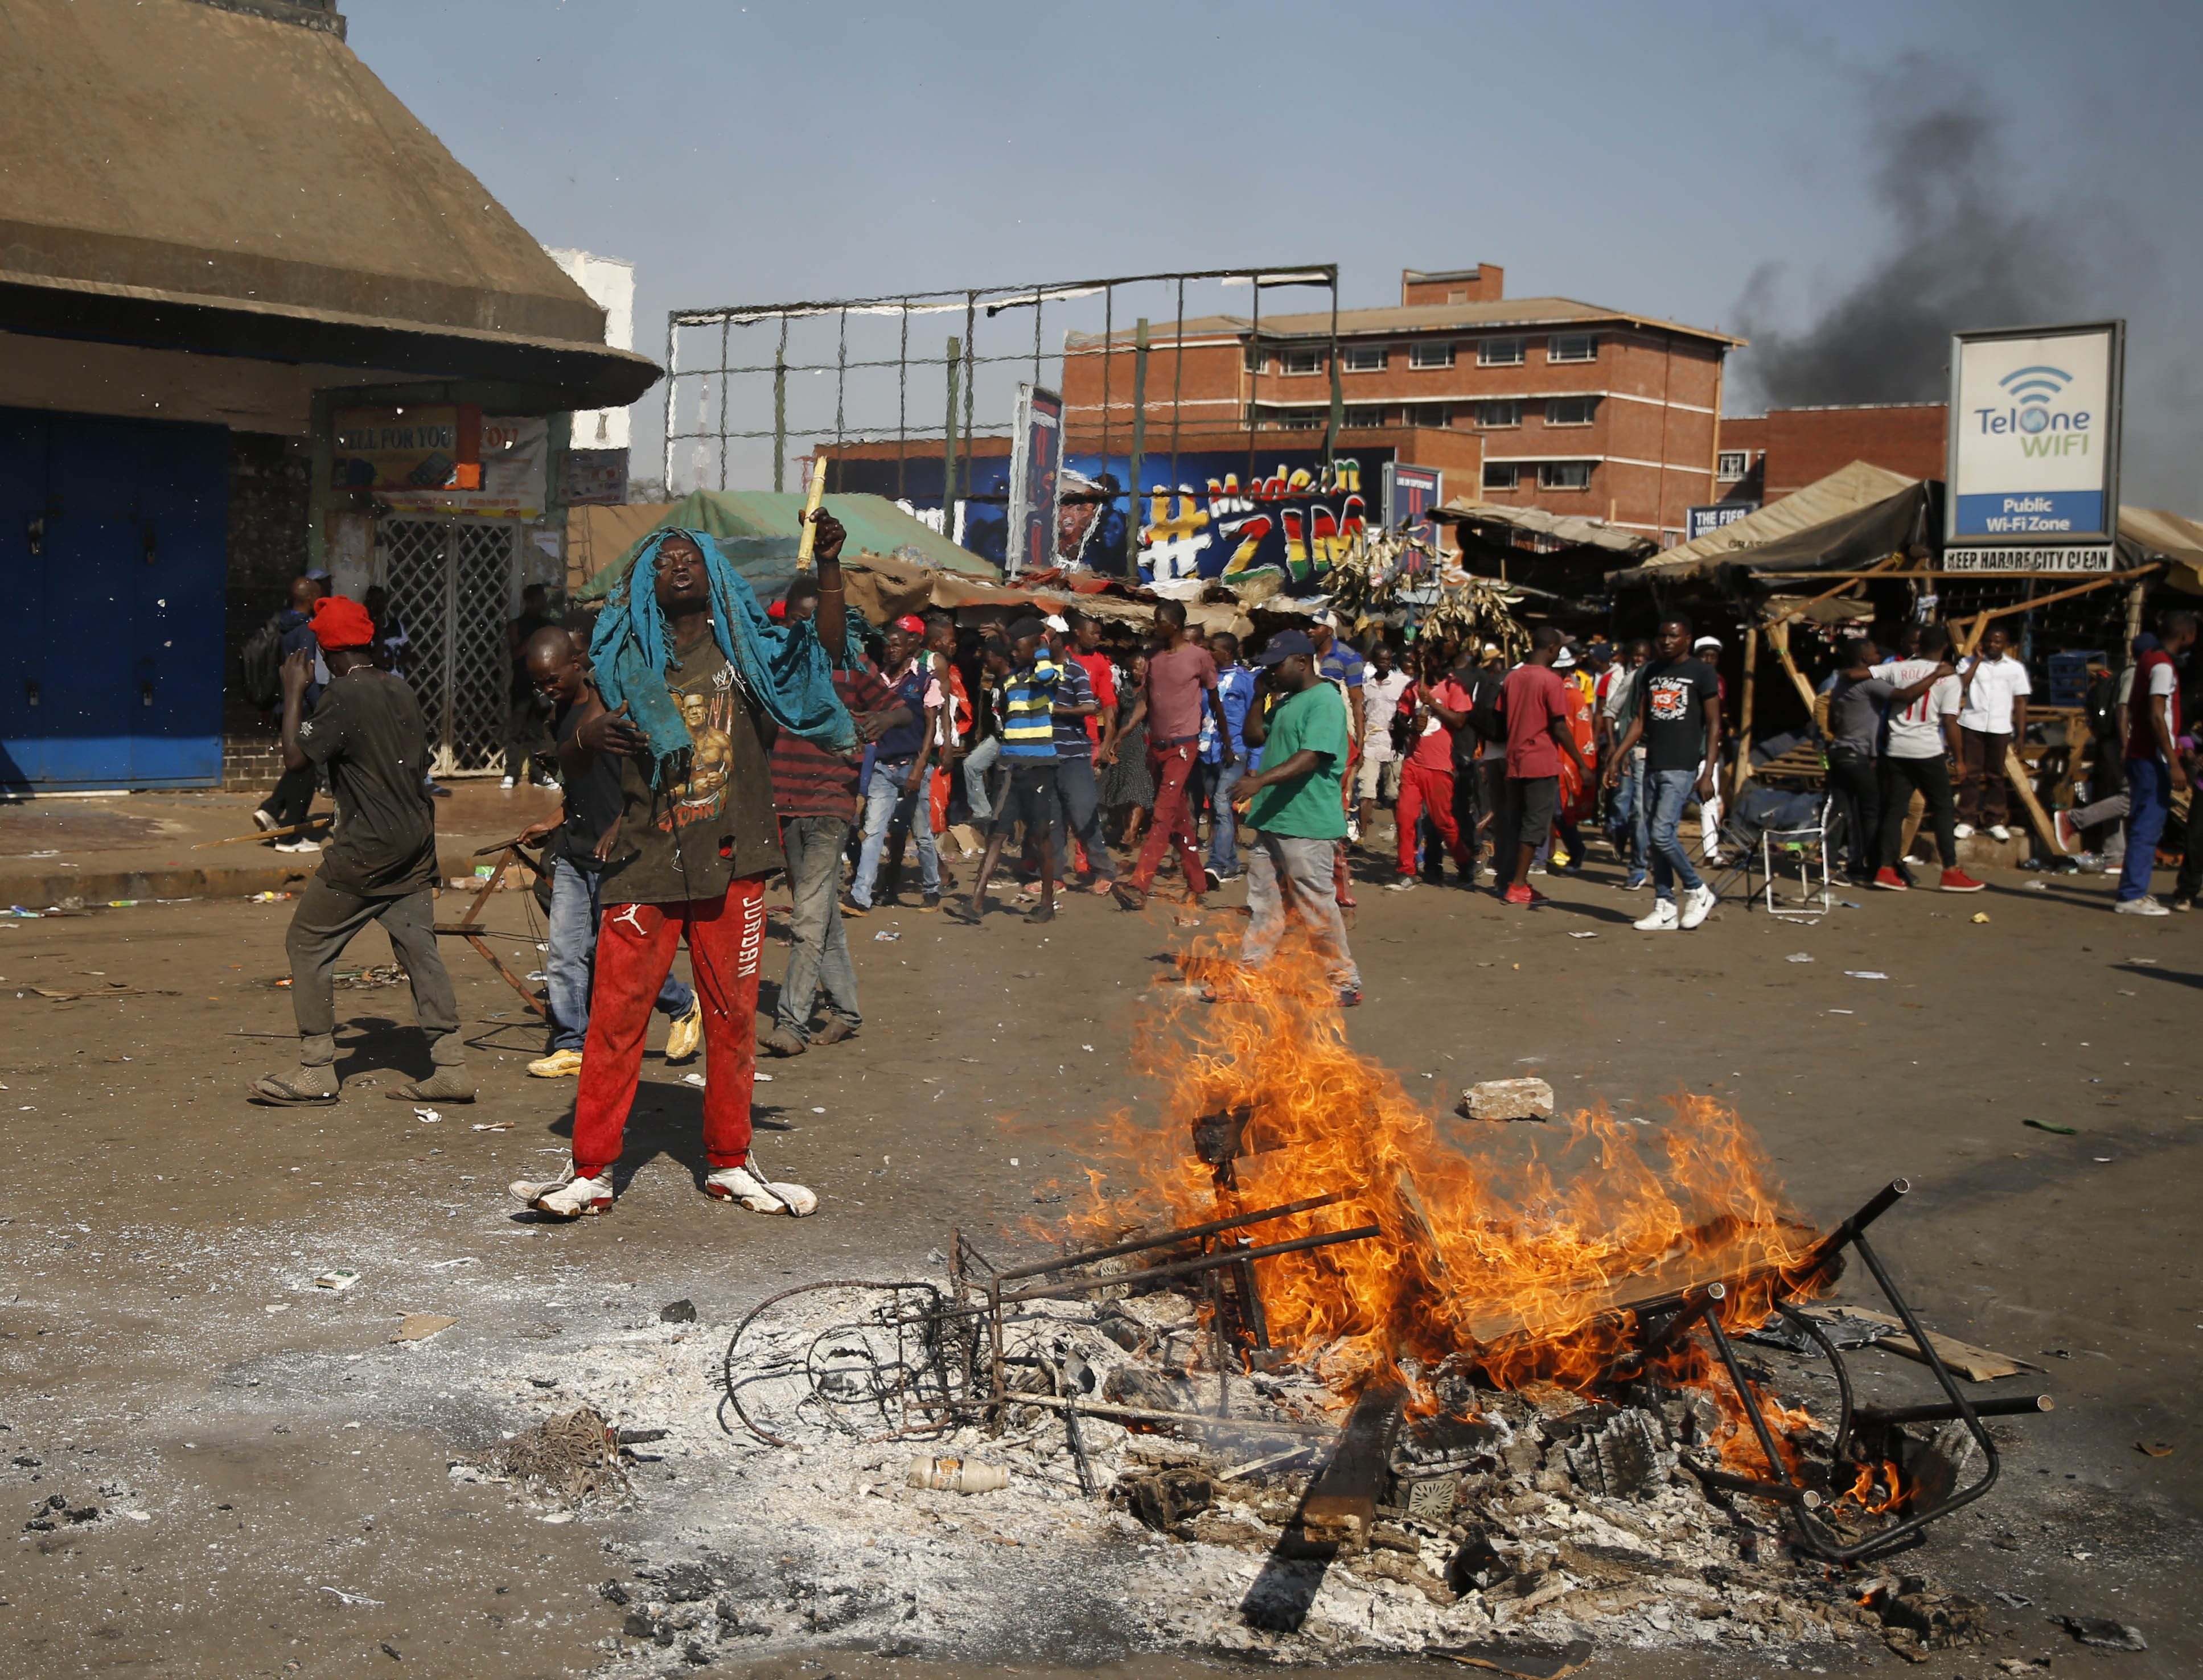 Zimbabwe Churches offer to act for peace after post-election violence 